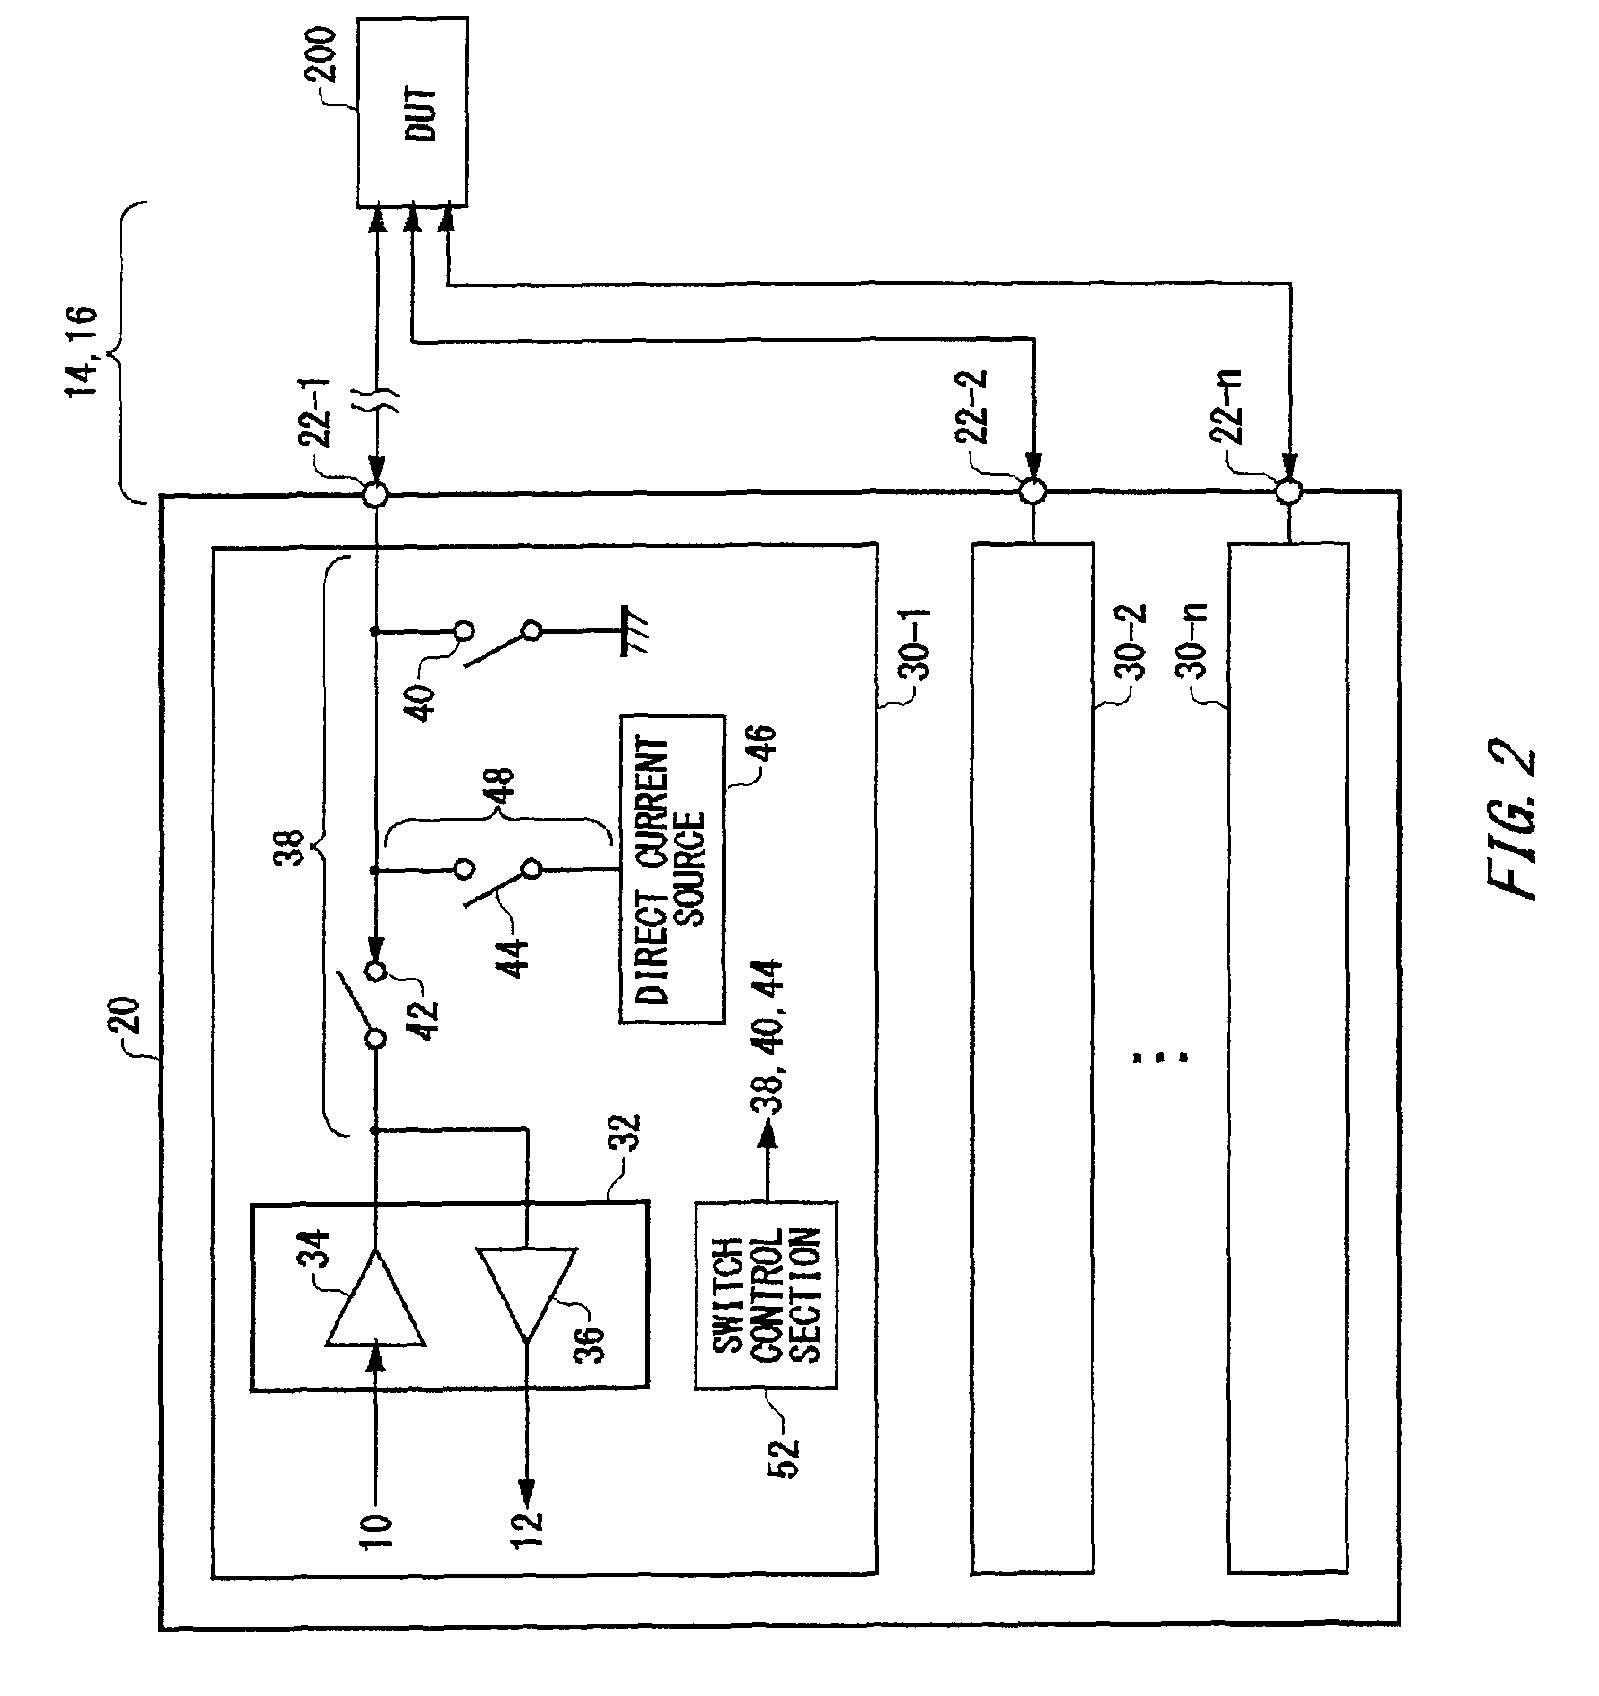 Test apparatus, pin electronics card, electrical device and switch